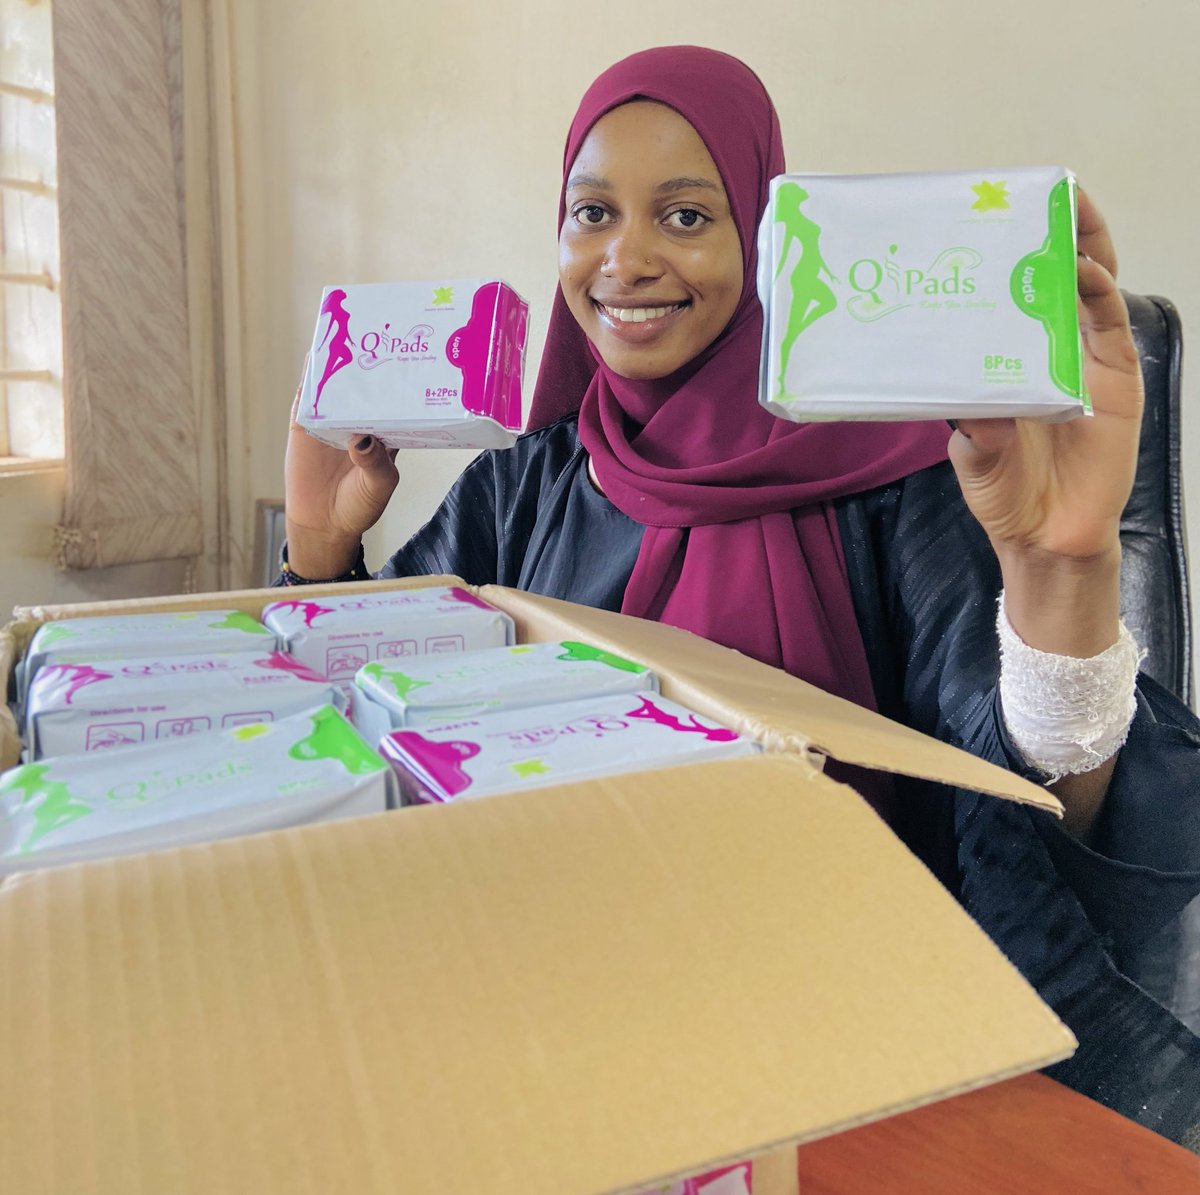 Menstrual care products are a basic necessity, yet not everyone who needs these products has access to them,but the good news is that
@PadsQi is here to help solve the issue of #periodpoverty 🩸by  providing #FreshAndComfortable pads at fair prices. 

☎️+256 702 608809